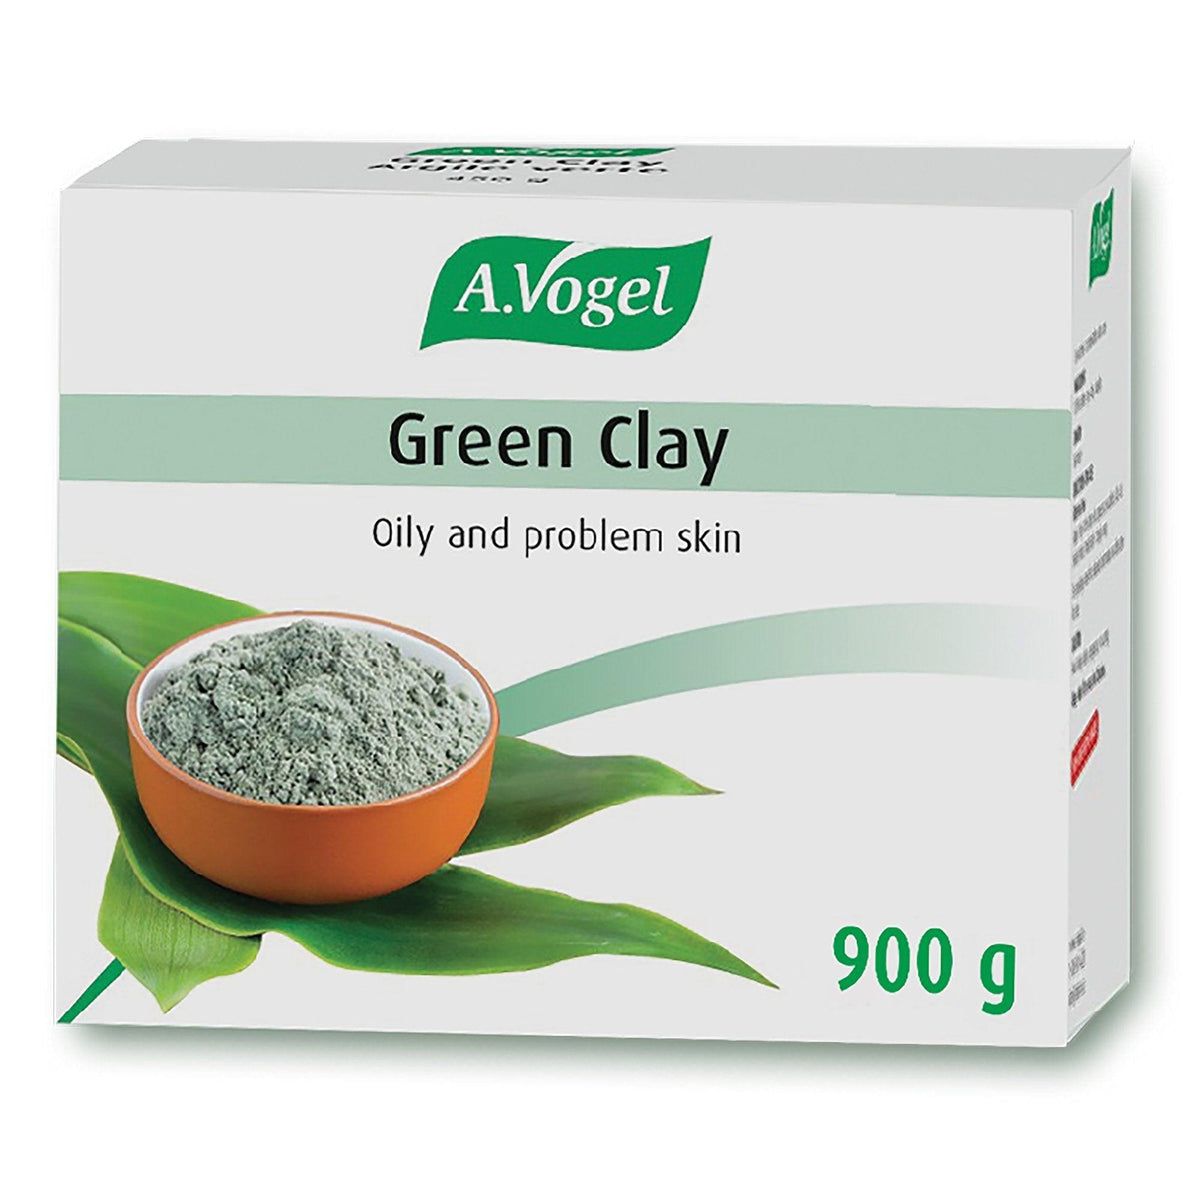 A.Vogel Green Clay 900g Face Mask at Village Vitamin Store